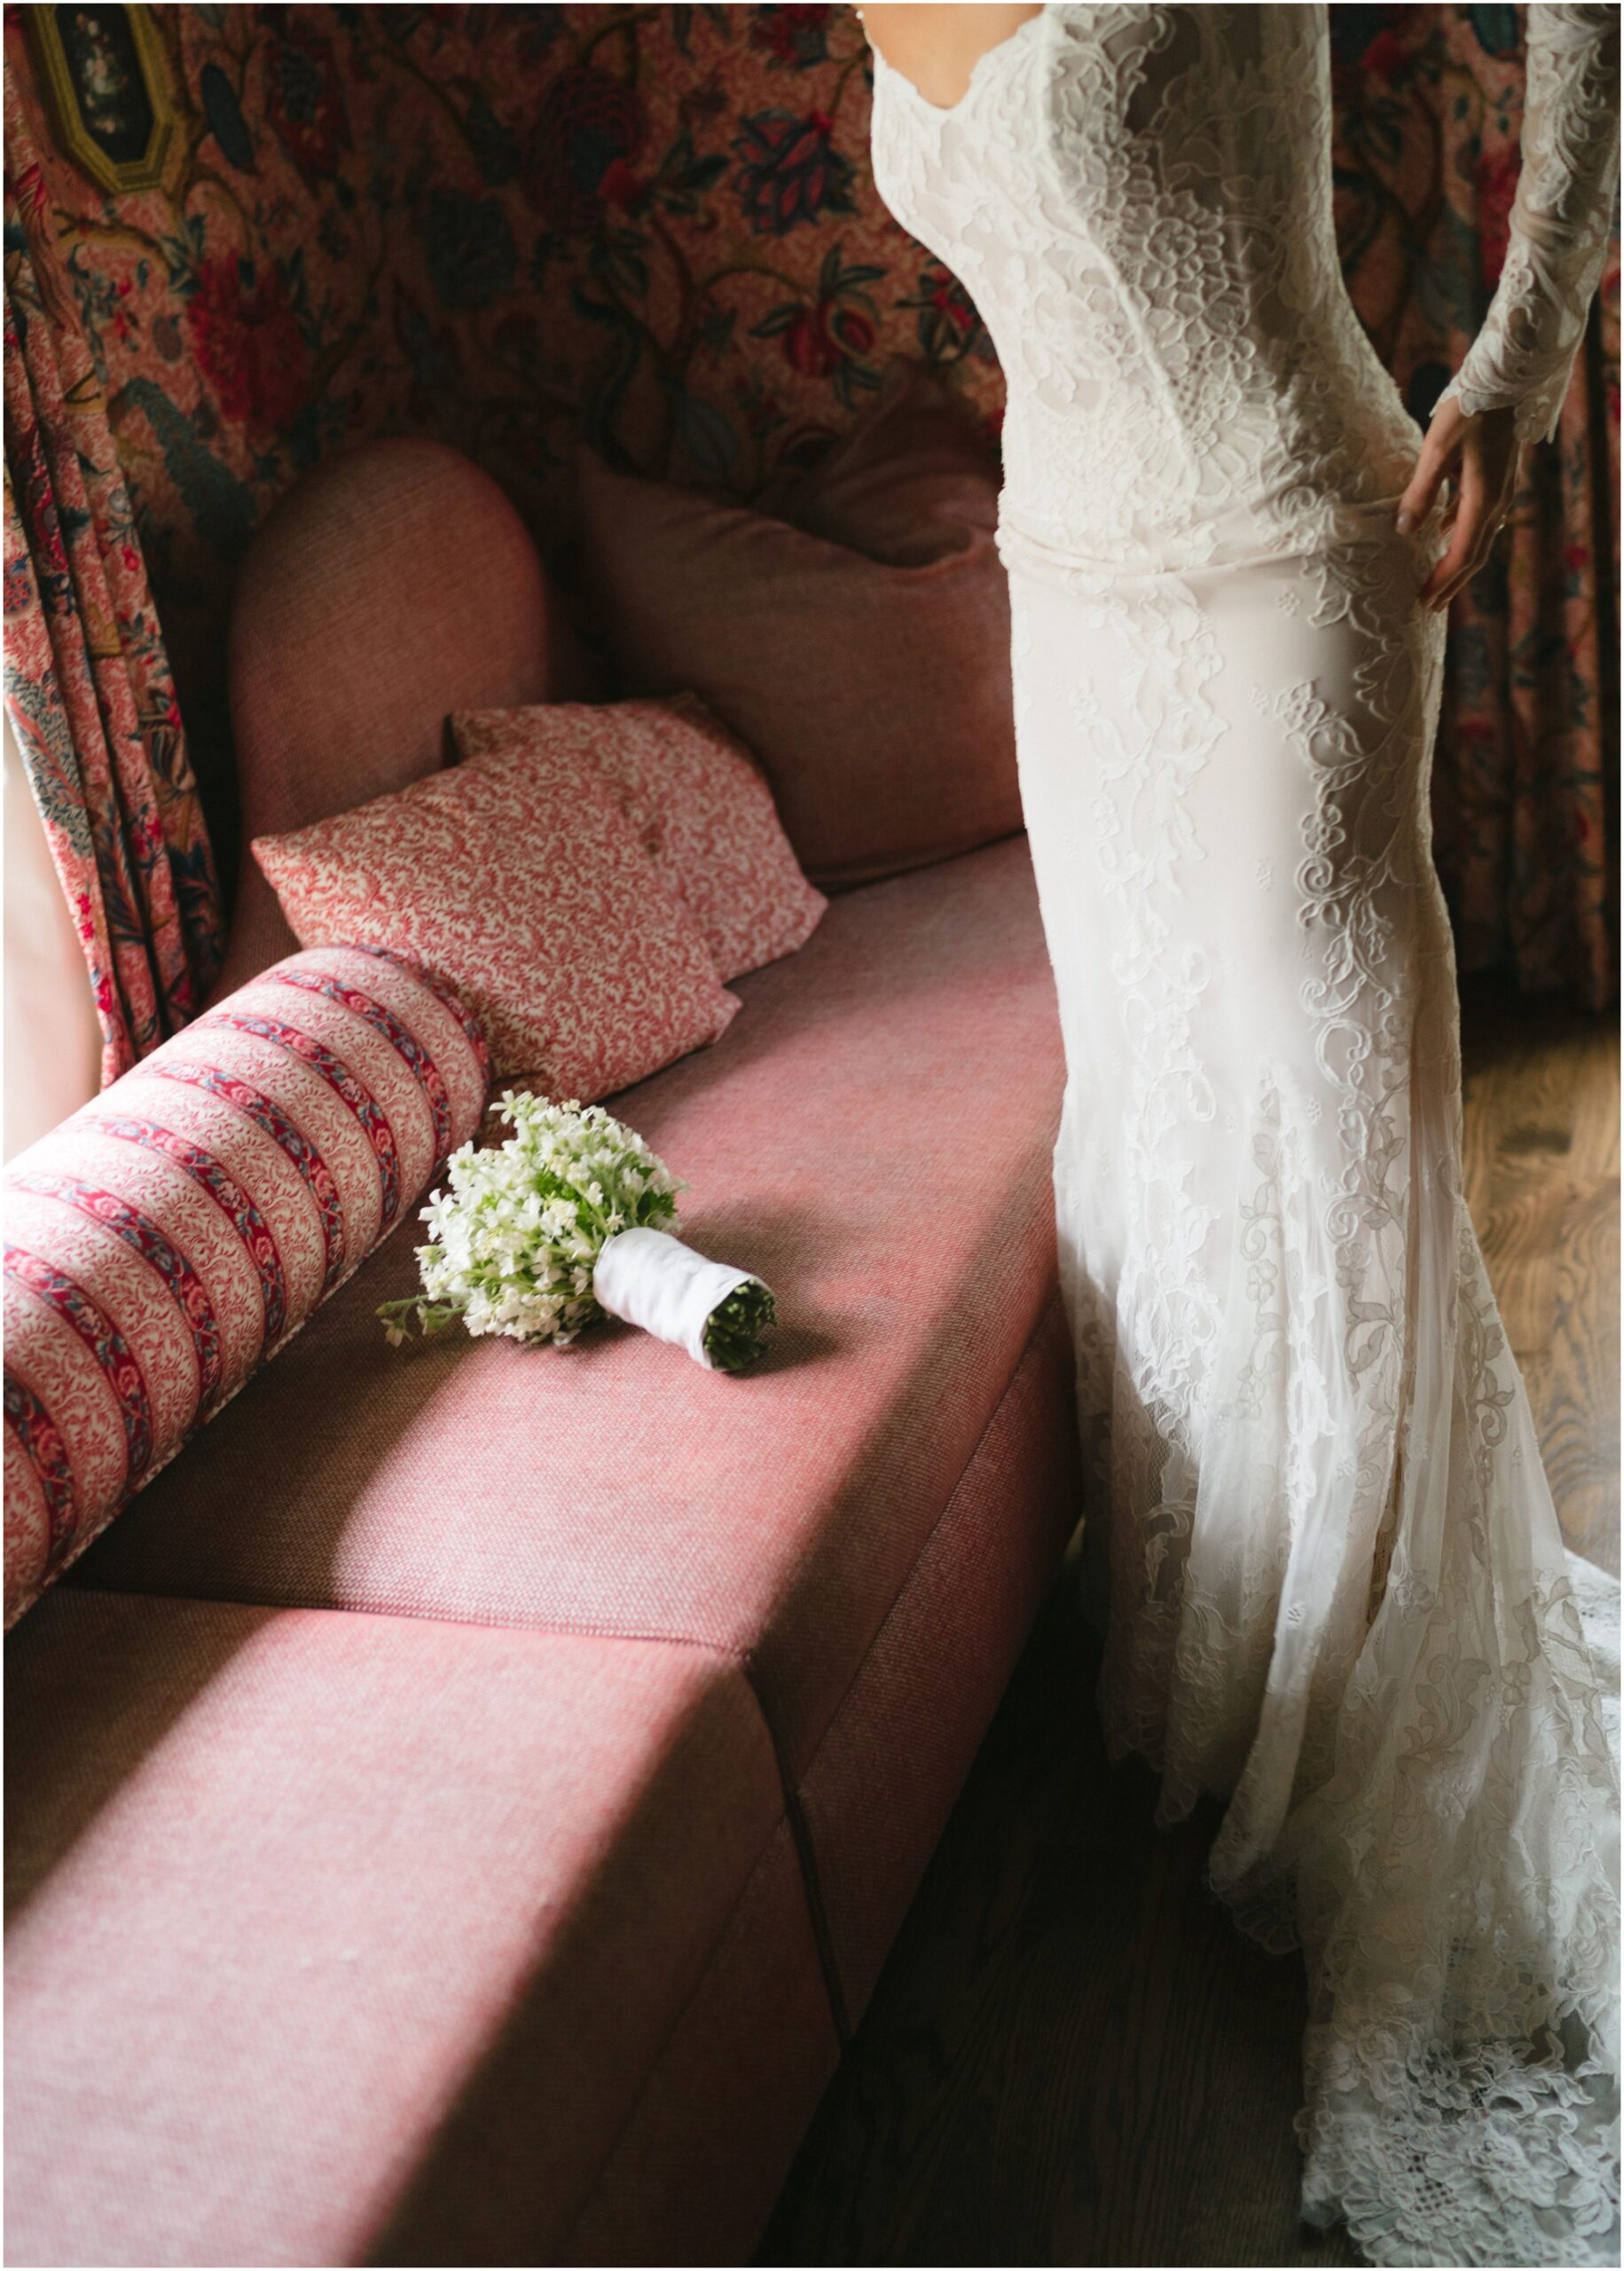 lihi hod bride at commodore perry estate in austin texas in the pink room LaVerne Suite